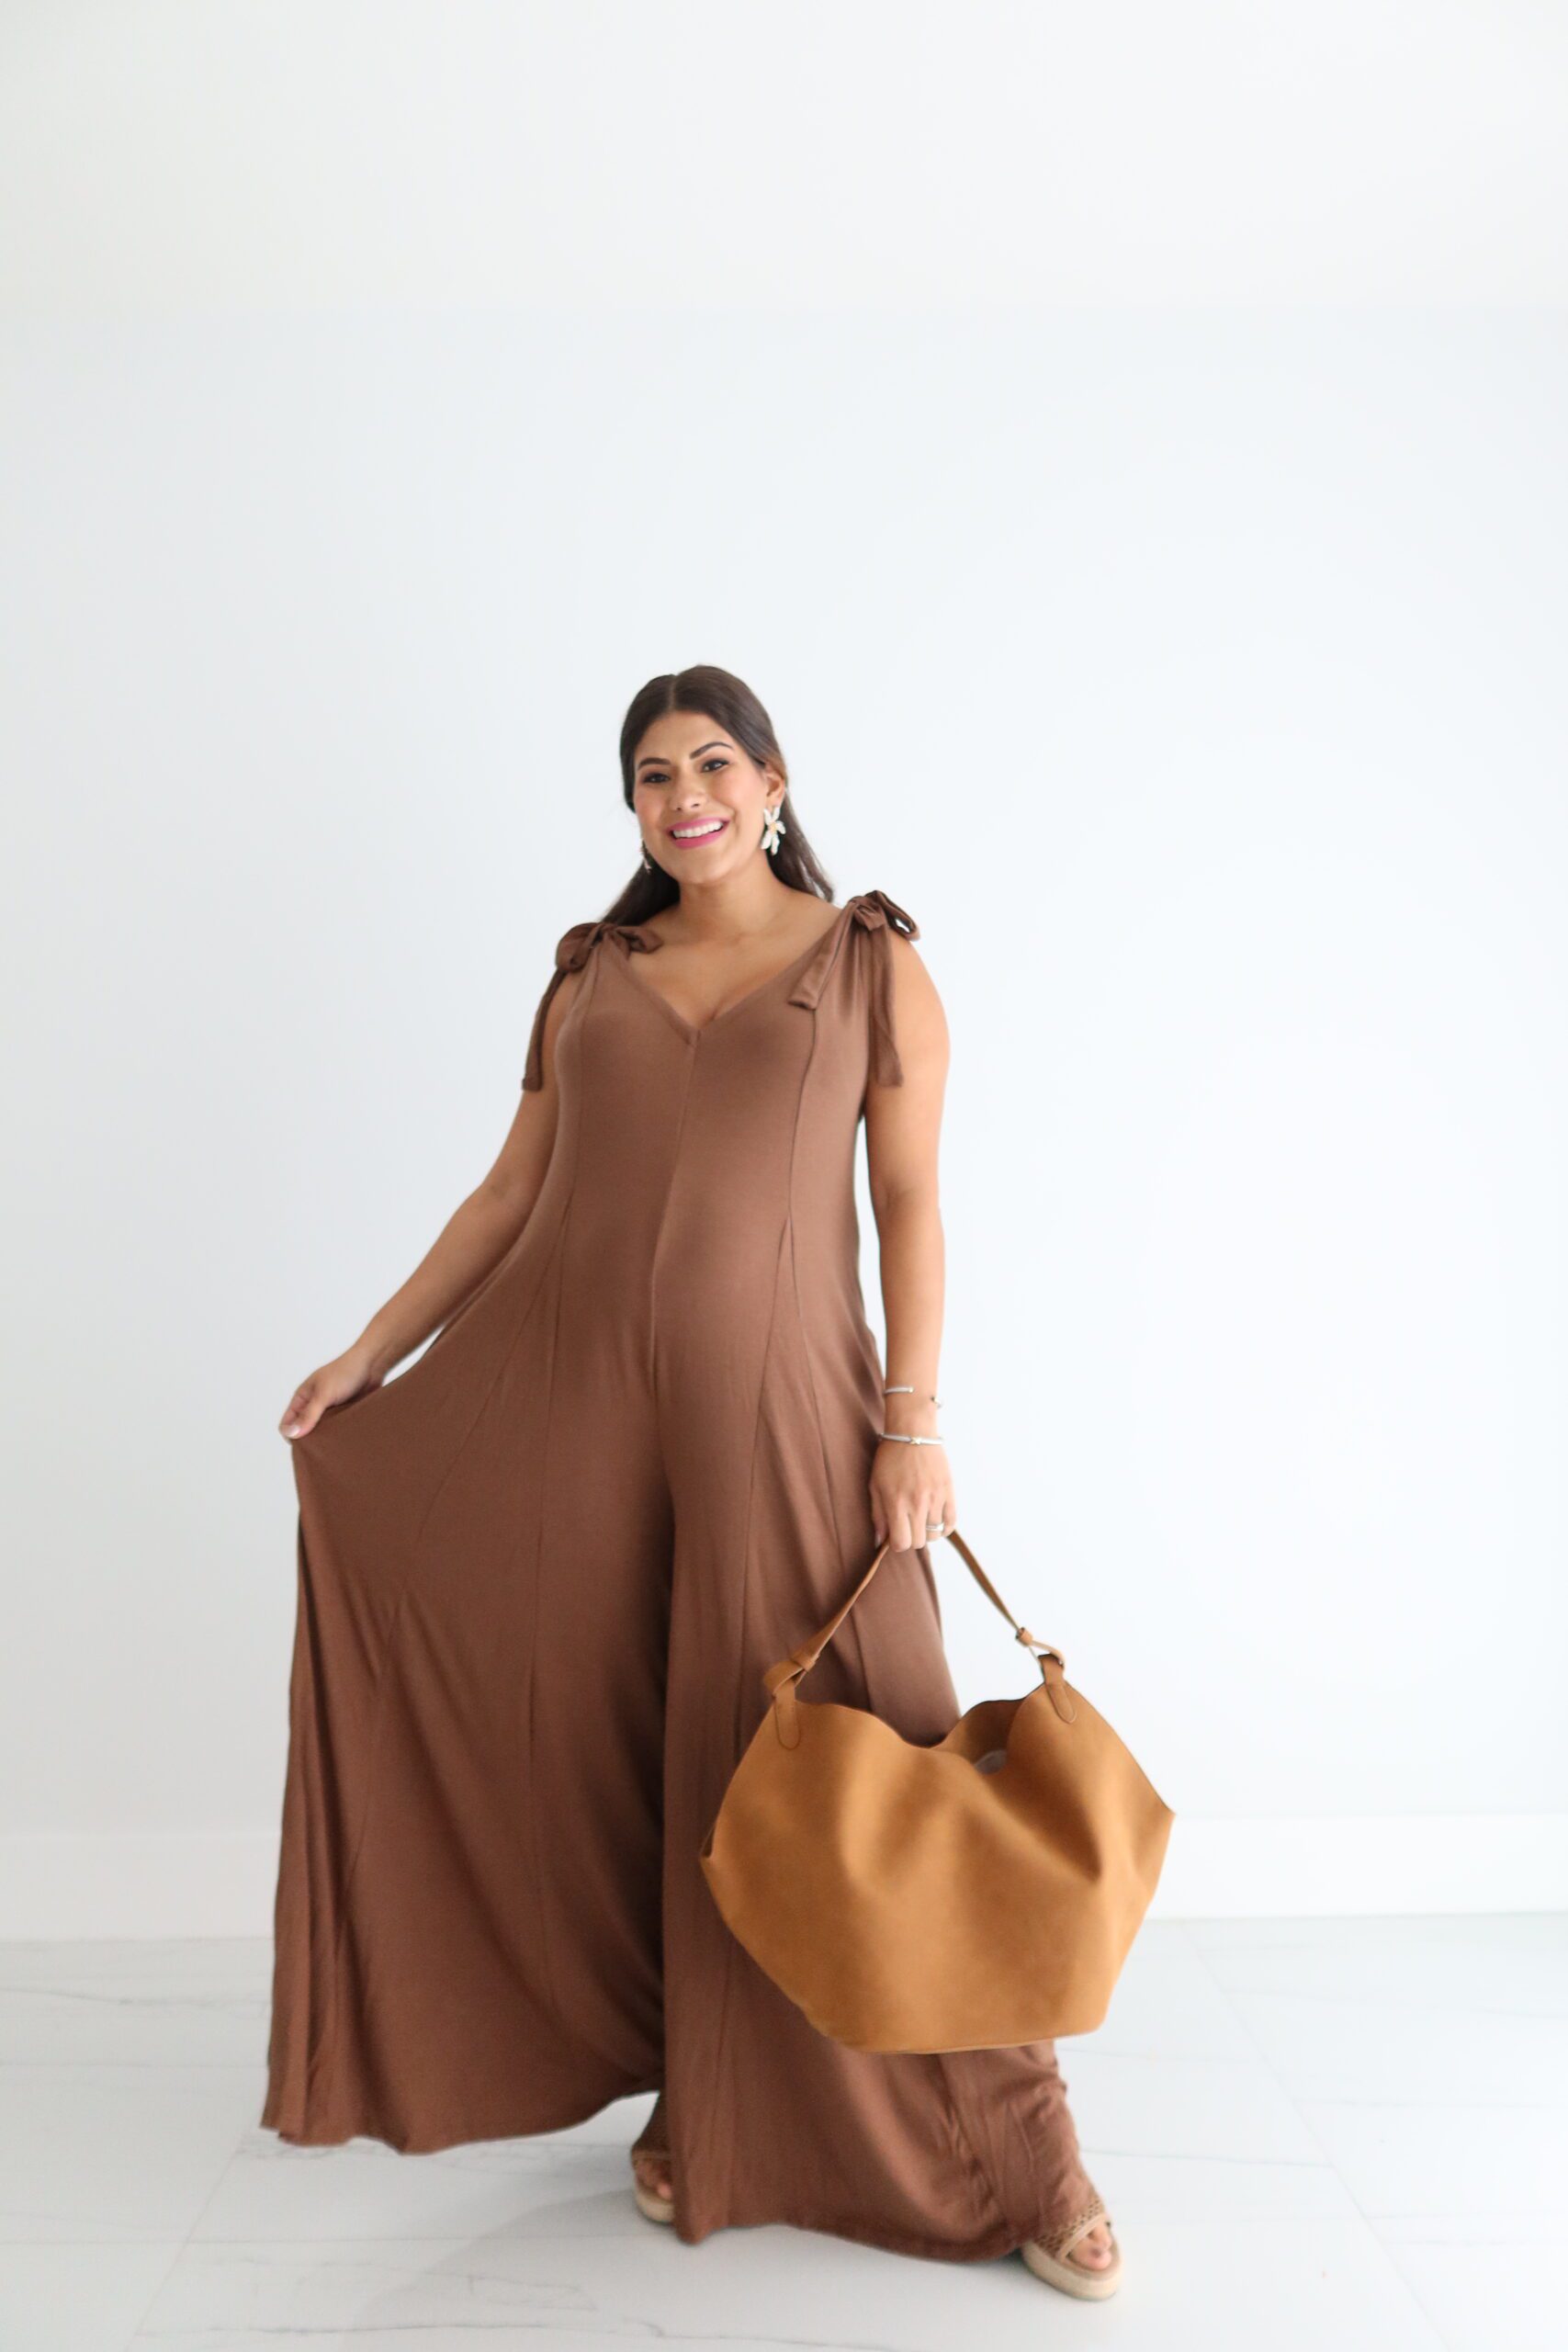 Lucky One Brown Jumpsuit! Perfect for a casual night out, you'll look and feel great as you strut your stuff in this comfy and fashionable must-have! So, don't hesitate - jump into the Lucky One and have the time of your life! This jumpsuit features a v-neckline, adjustable self-tie shoulder straps, two functional pockets, pleated detailing, and a flared leg.